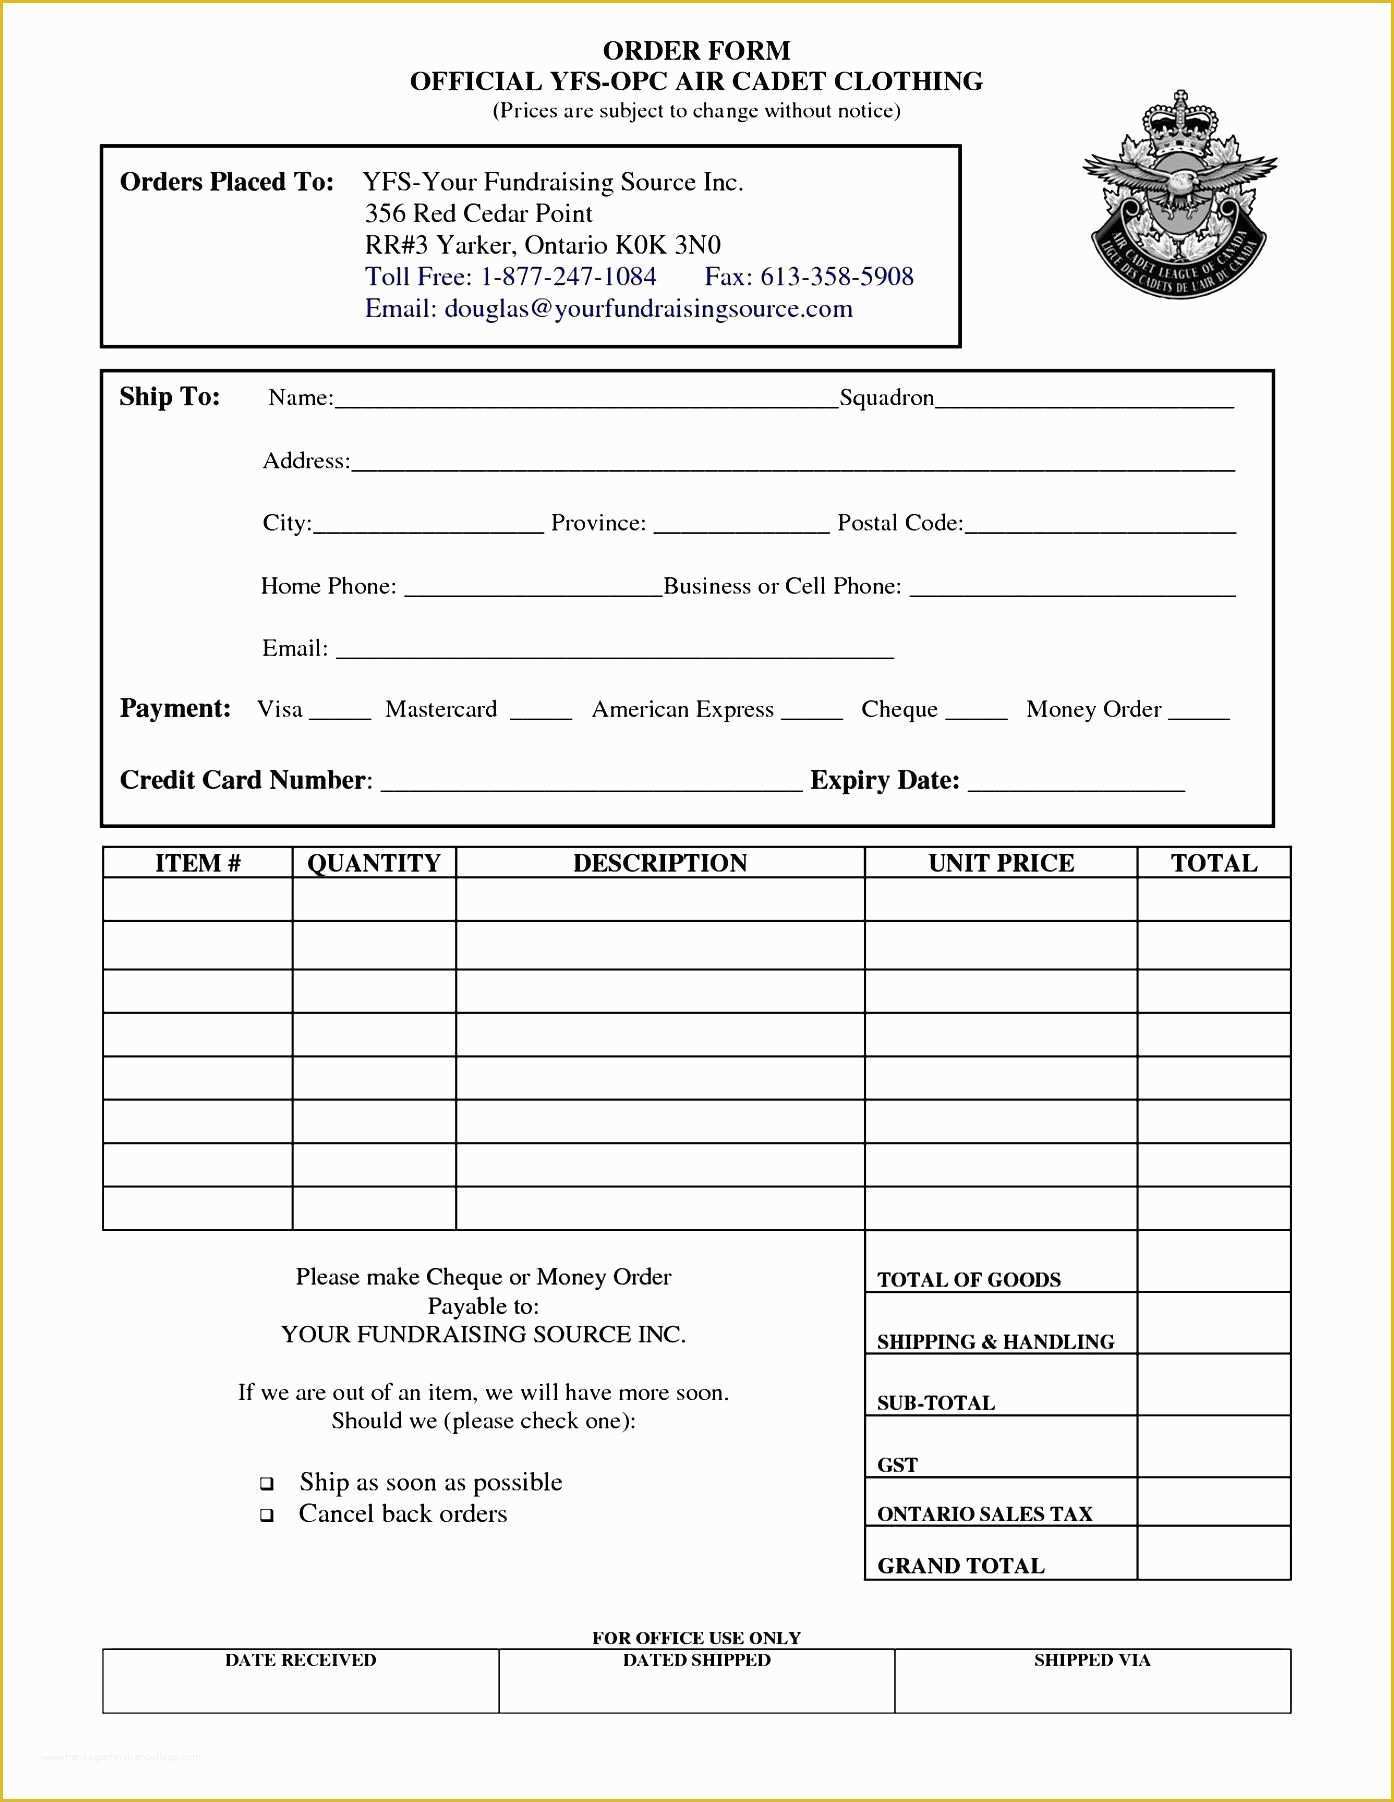 Merchandise order form Template Free Of Clothing order form Template Free